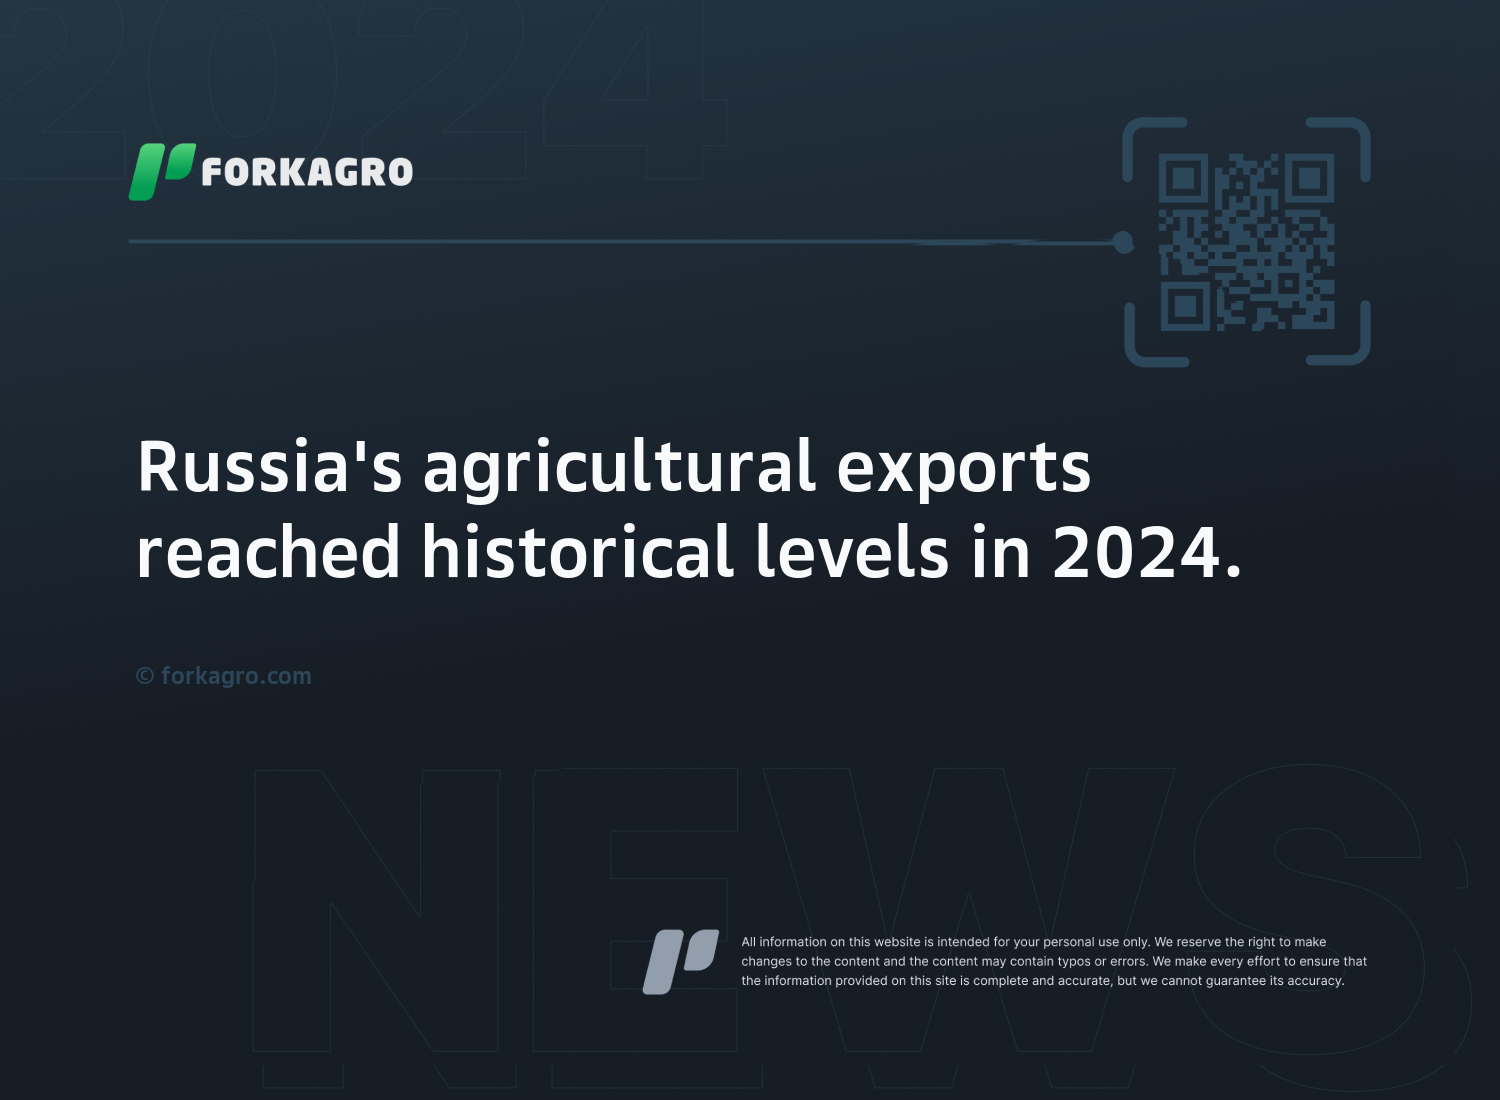 Russia's agricultural exports reached historical levels in 2024.